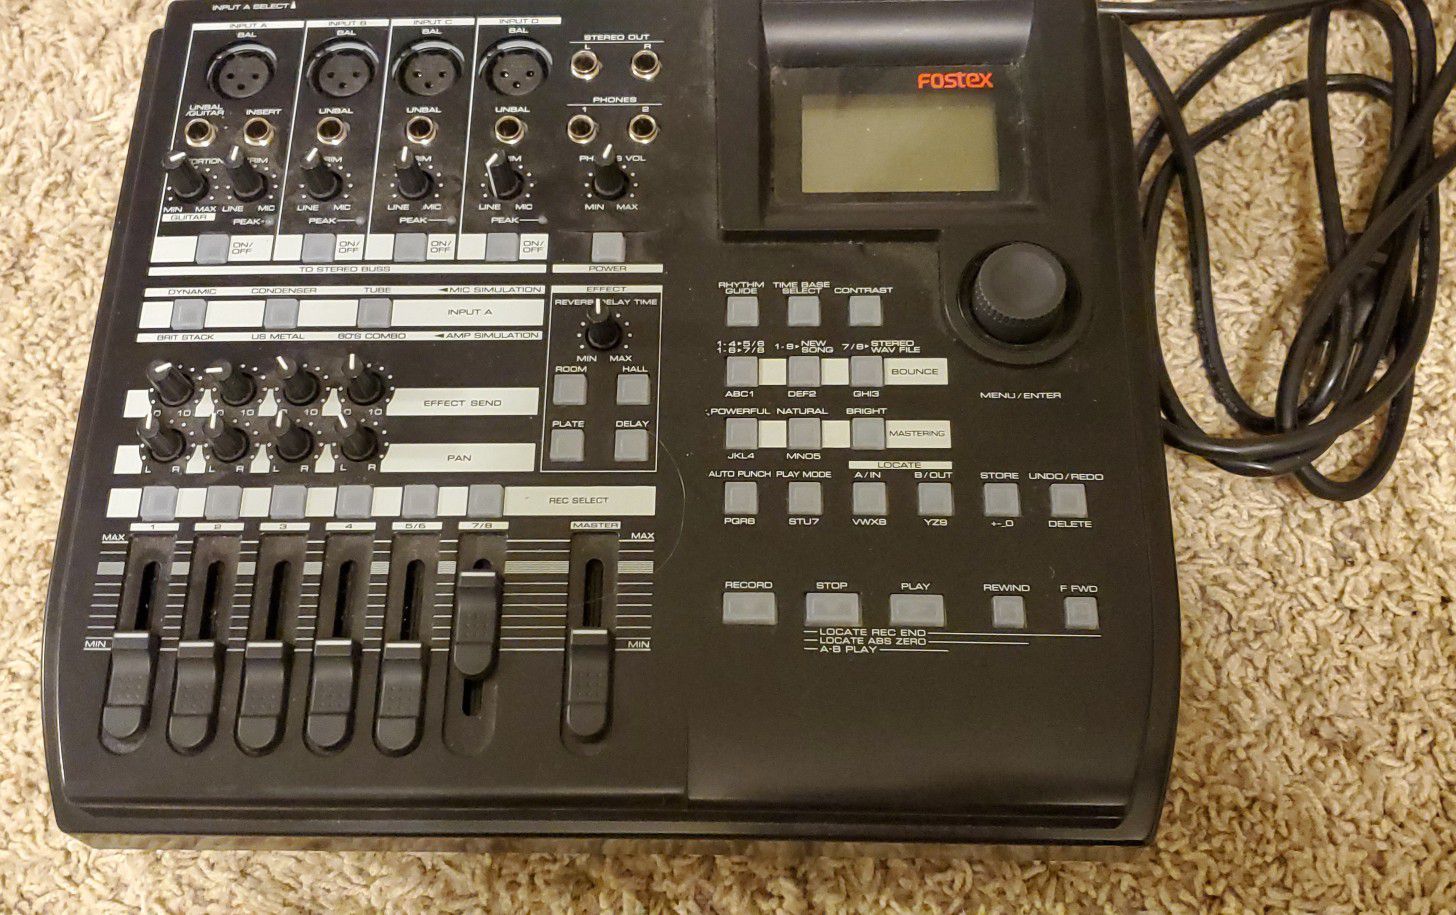 Fortex 8 track Recorder with CD rom